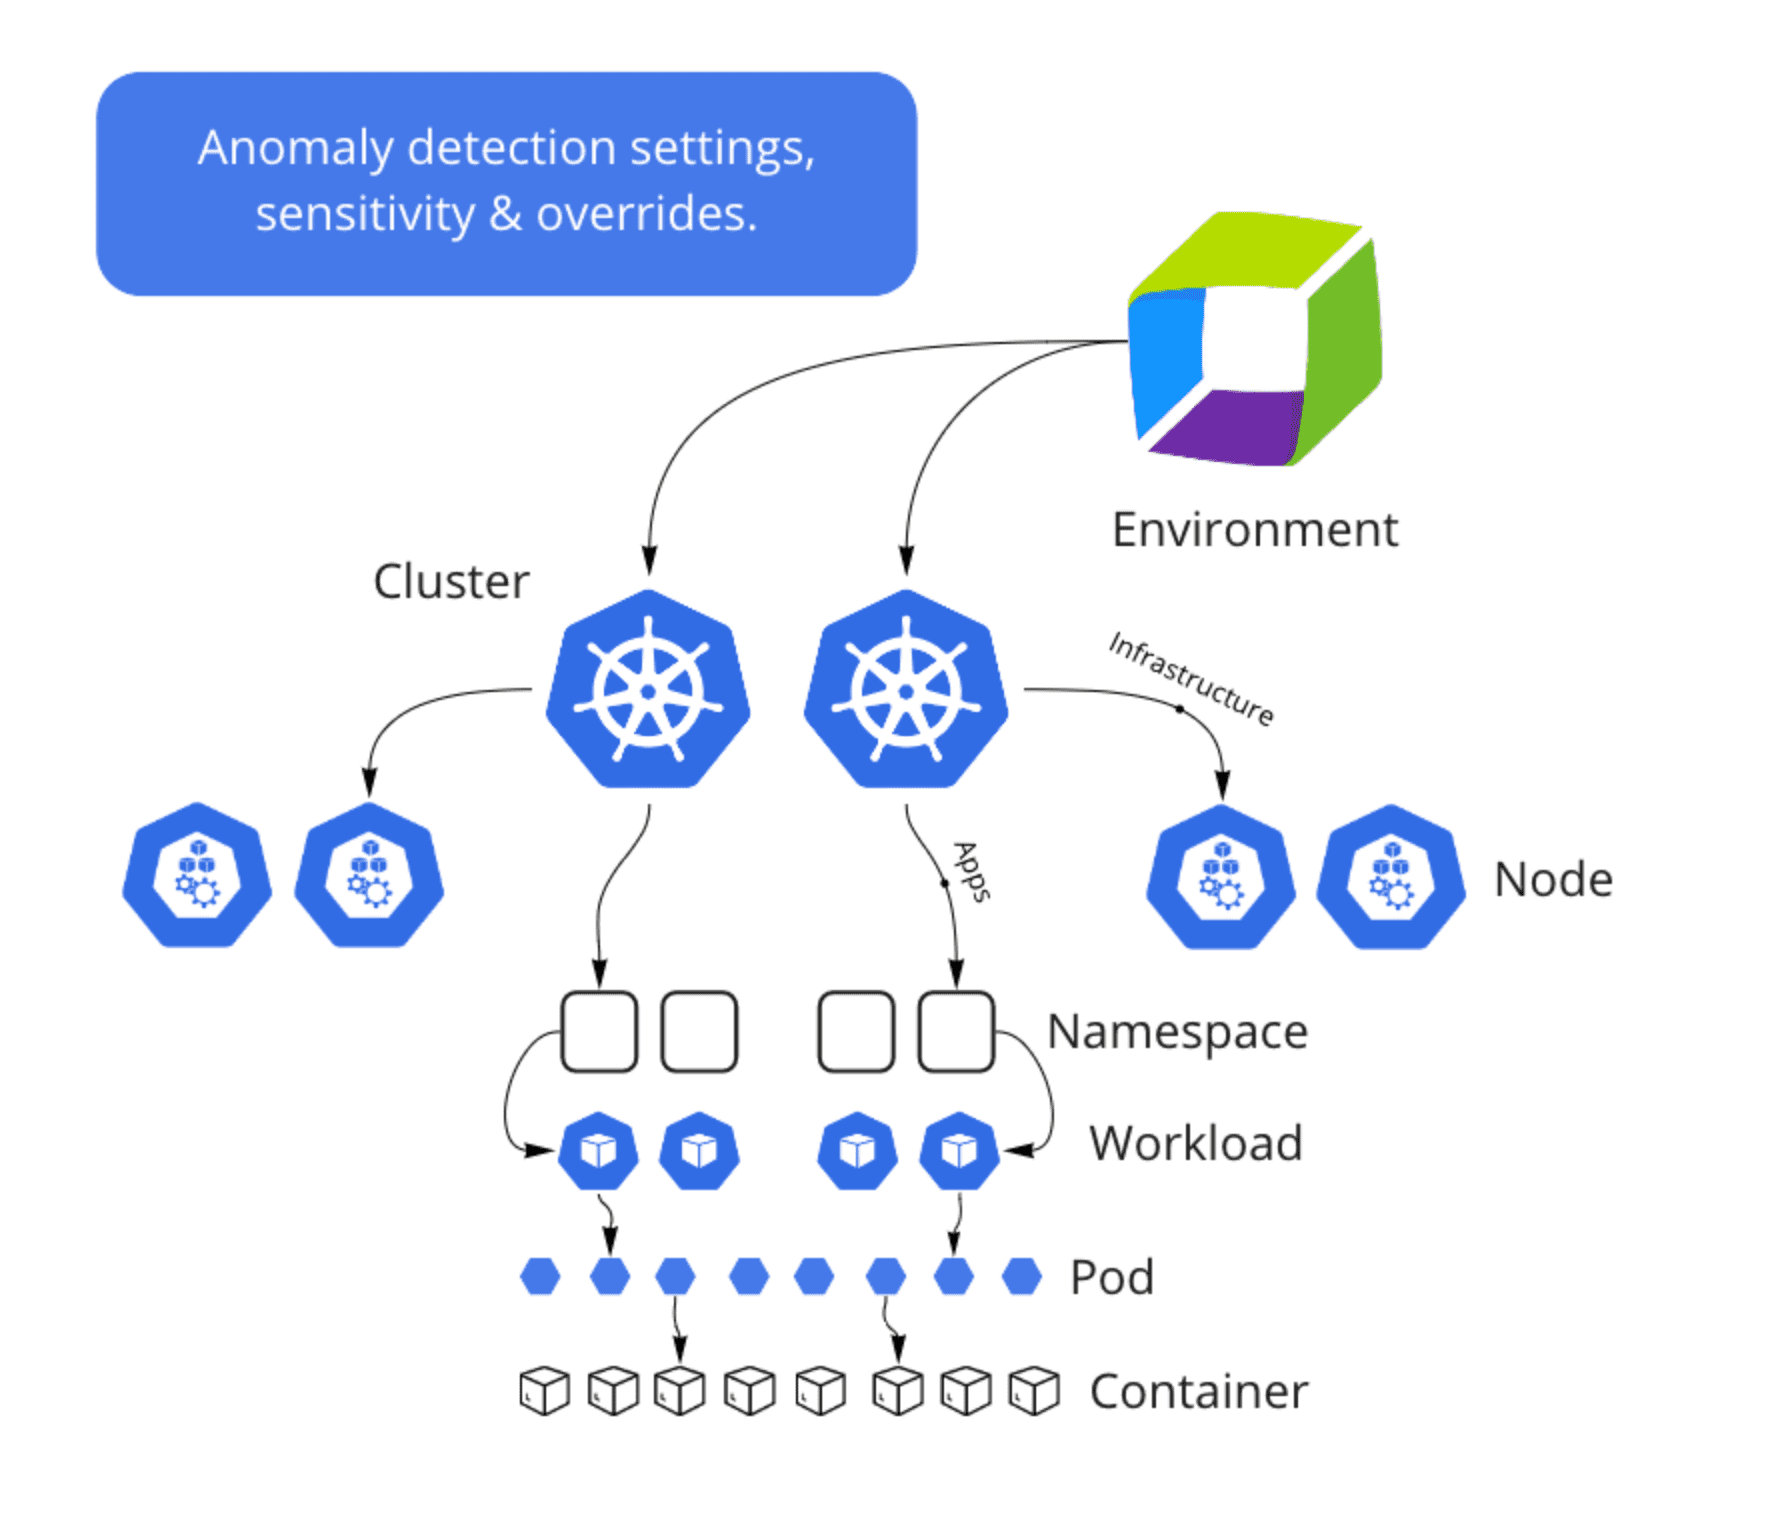 Anomaly detection settings, sensitivity & overrides Dynatrace